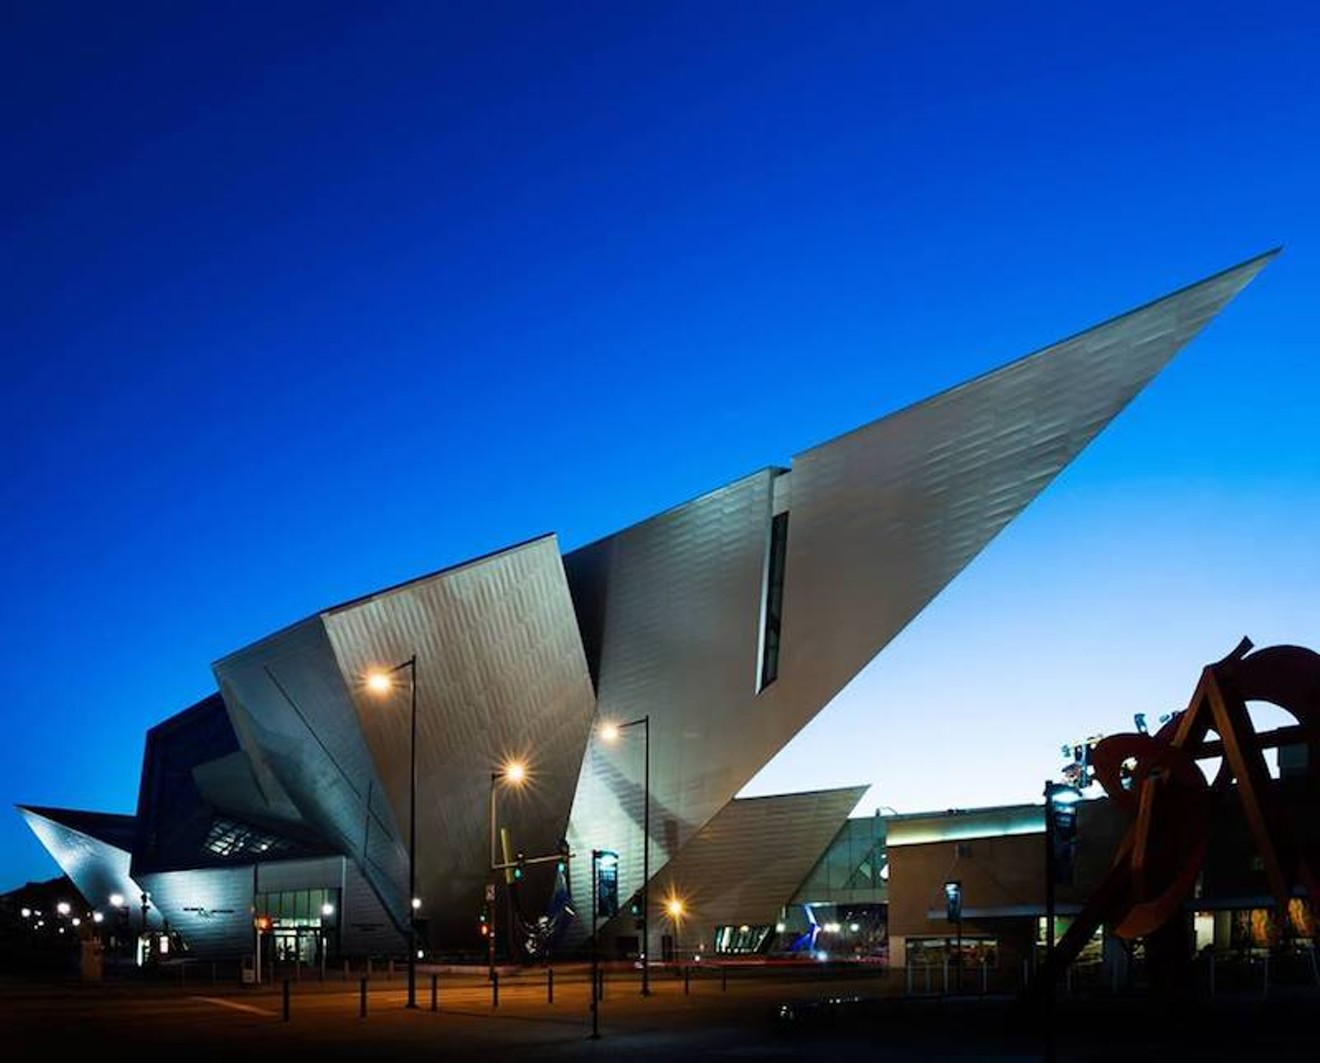 The Denver Art Museum is one of the institutions funded by the Scientific and Cultural Facilities District.